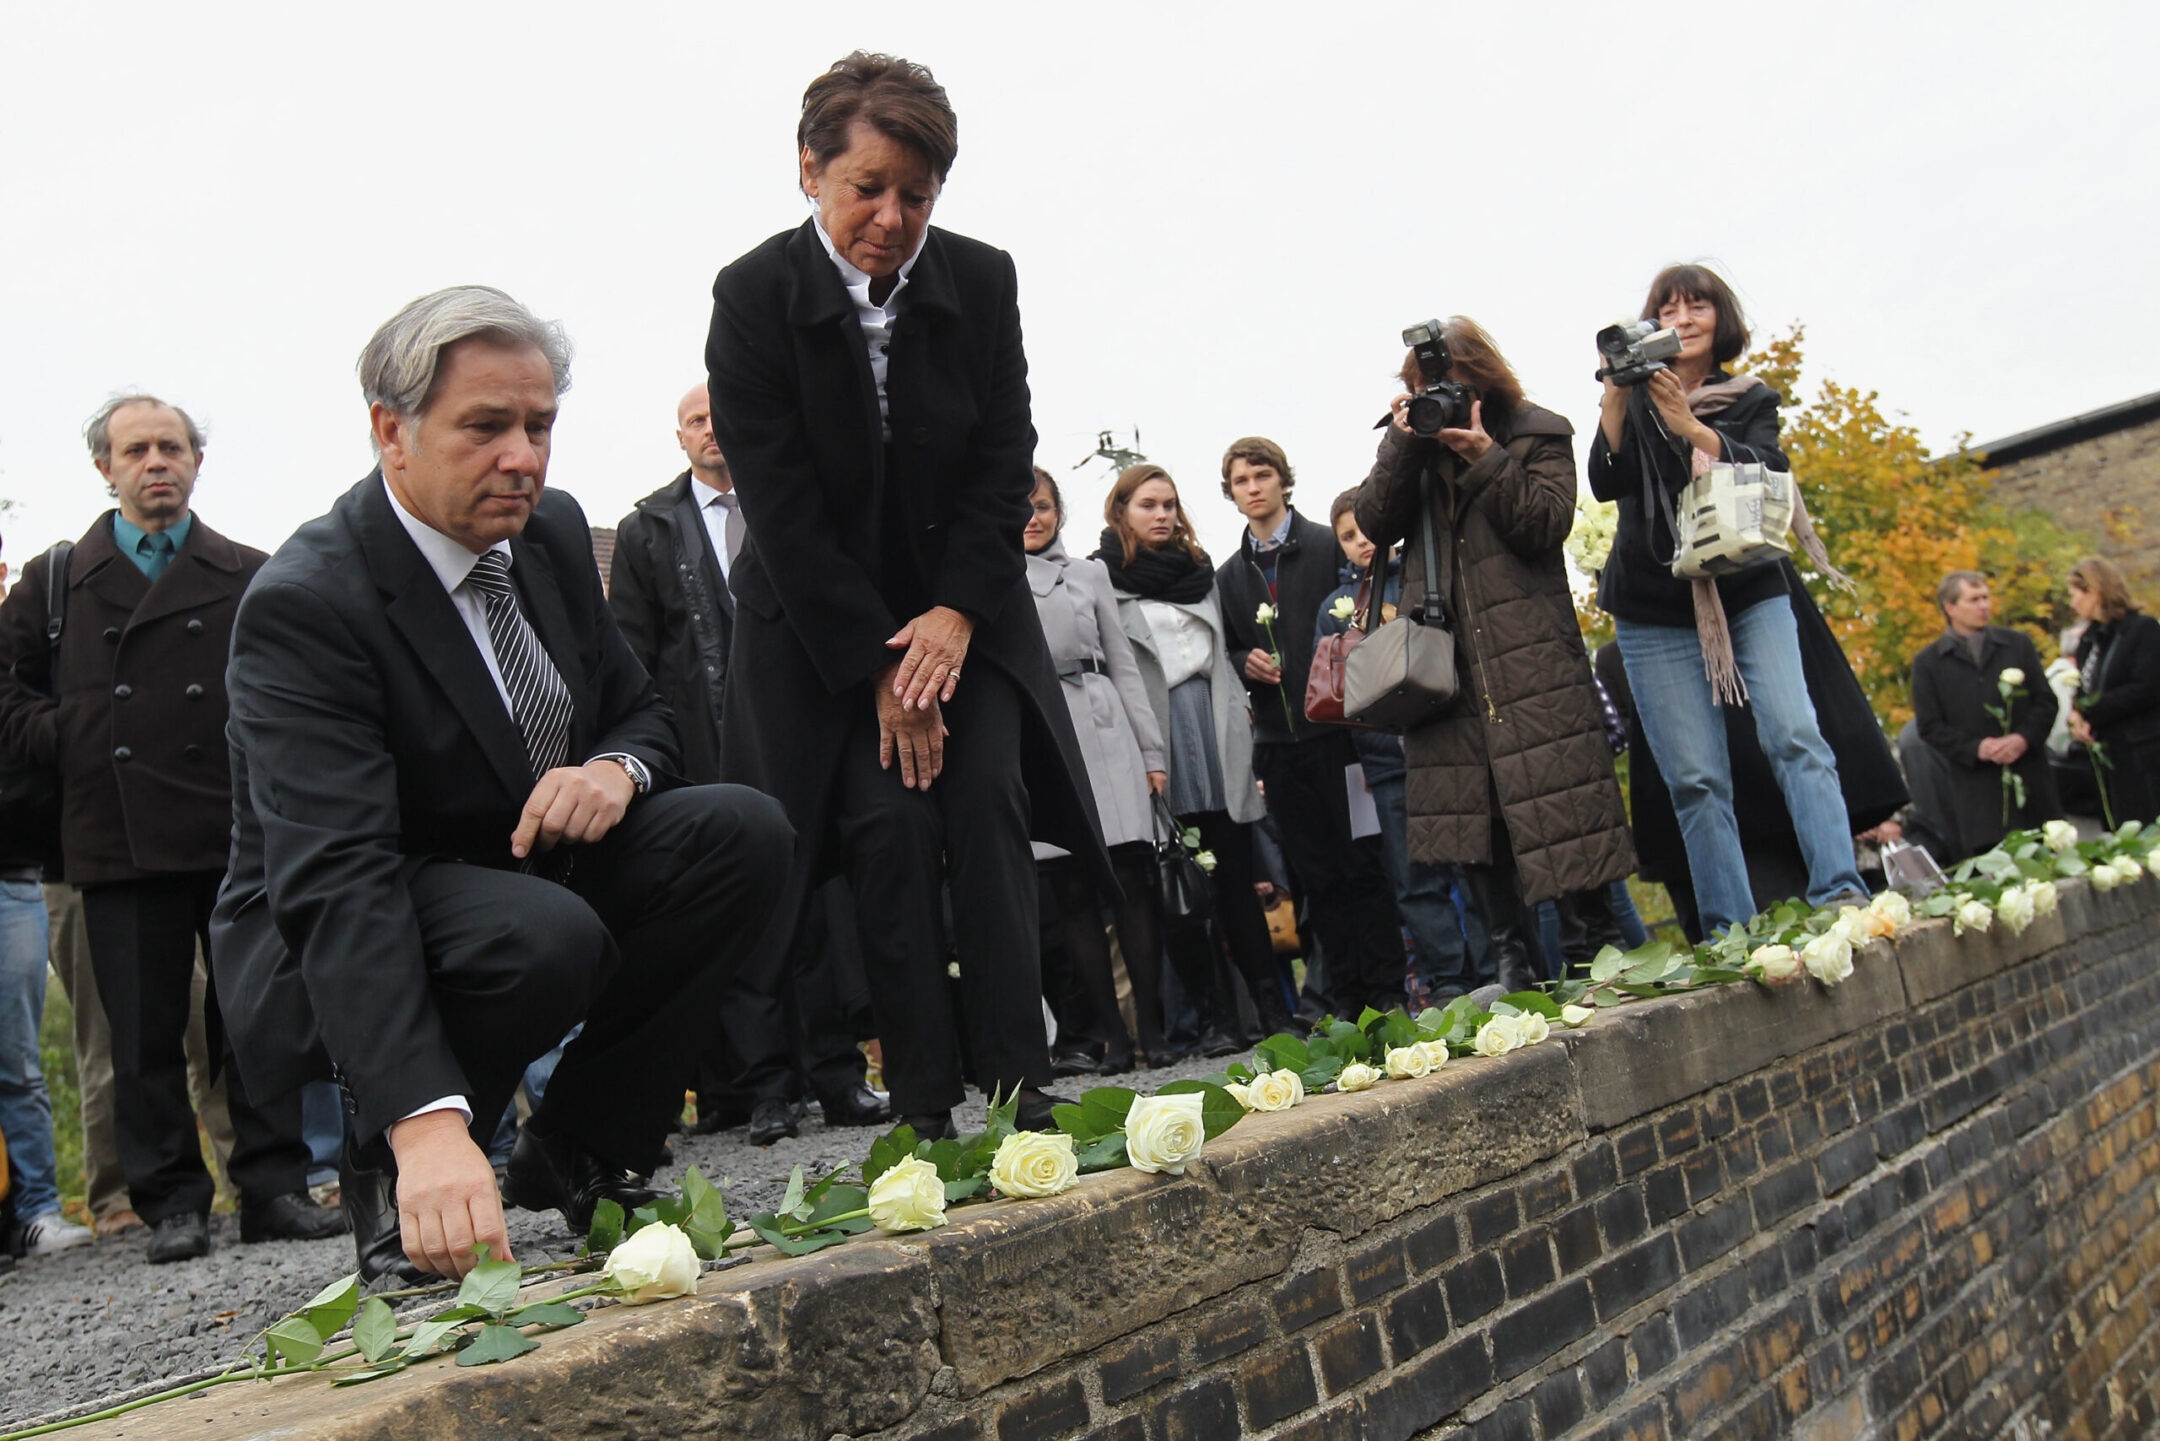 Lala Suesskind, then president of the Jewish Community of Berlin, stands during a ceremony marking the 70th anniversary of the deportation of Jews from Berlin to concentration camps during the Holocaust, Oct. 18, 2011.(Sean Gallup/Getty Images)